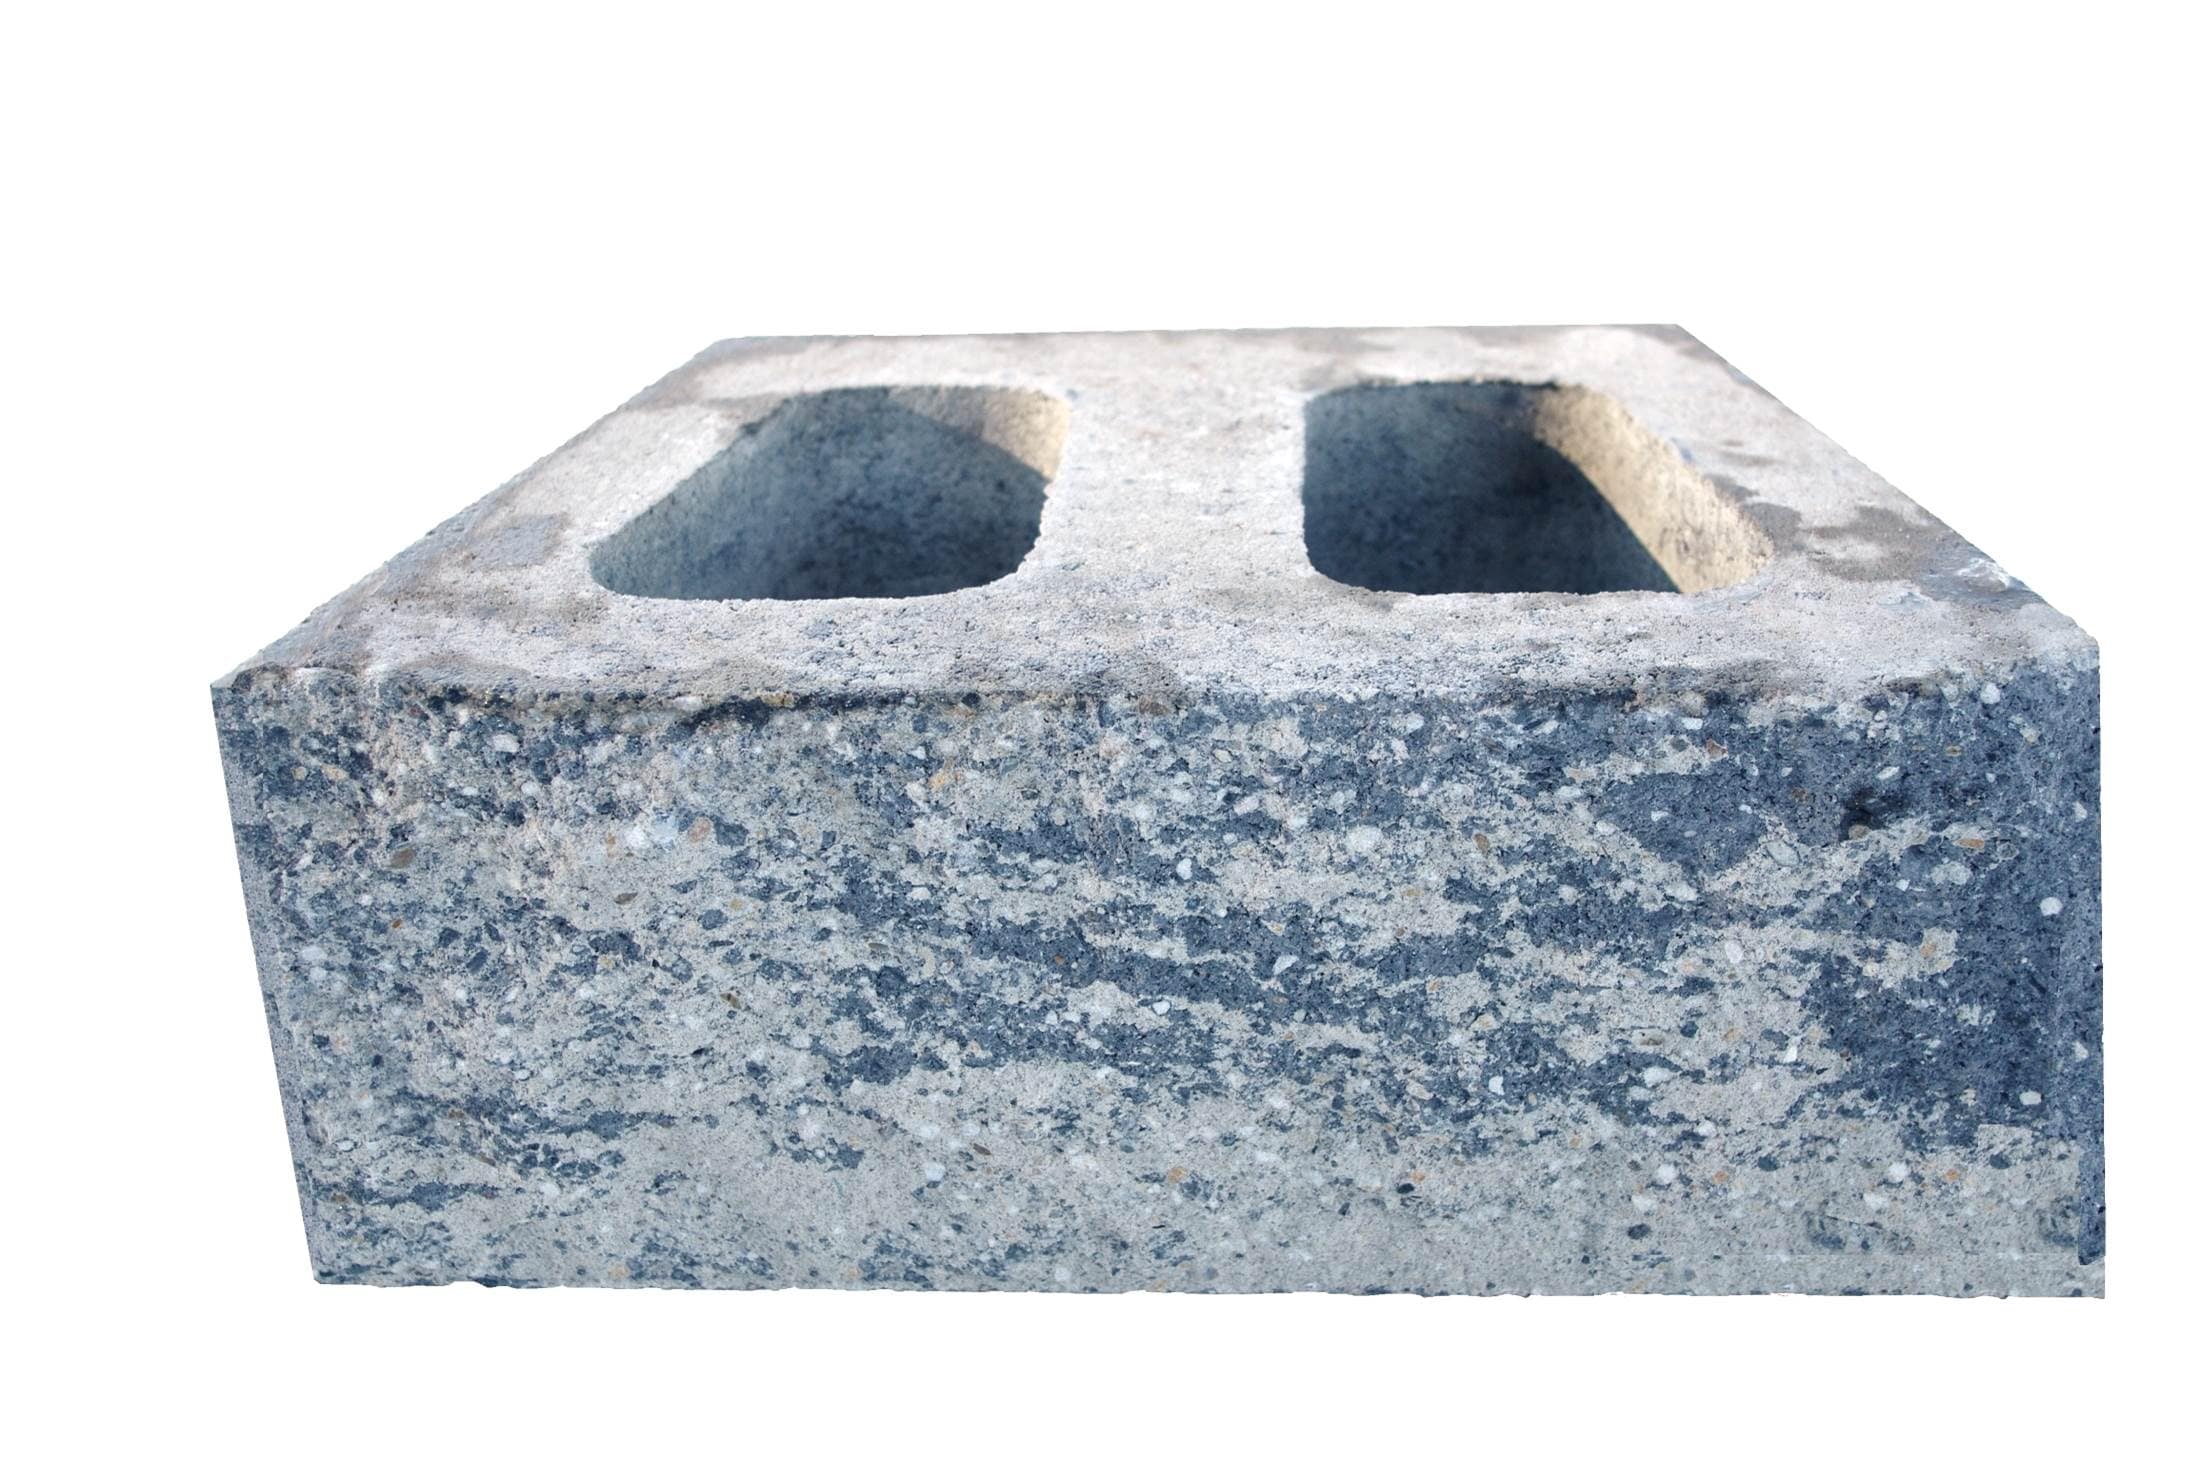 6-in H x 16-in L x 10-in D Gray/Charcoal Concrete Retaining Wall Block | - Lowe's KLGC